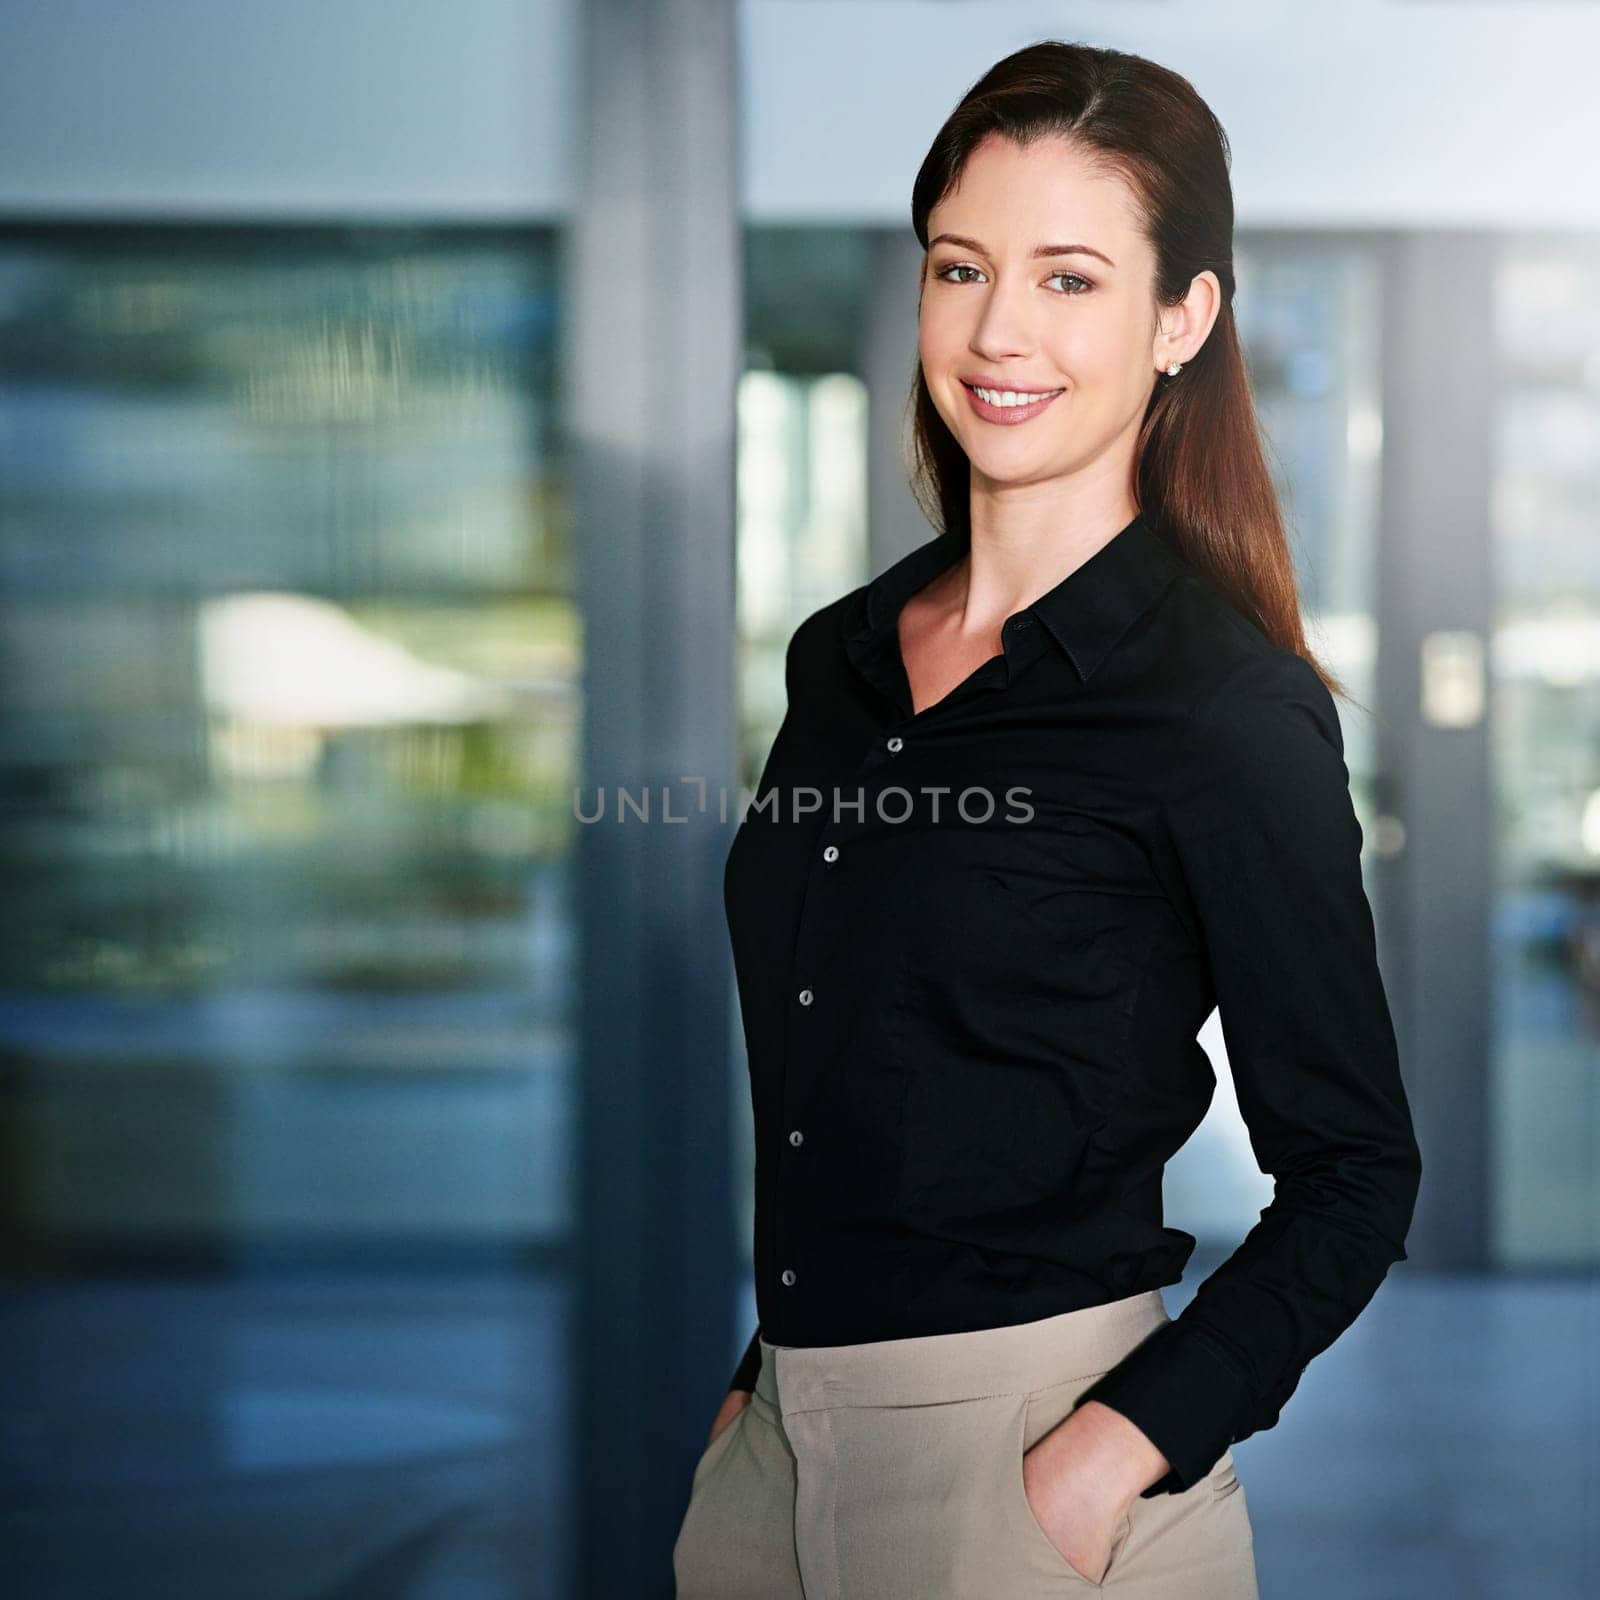 Business, girl and happy portrait in office for internship at corporate company for administrative work or tasks for developing skills. Female intern, professional and confident for future career